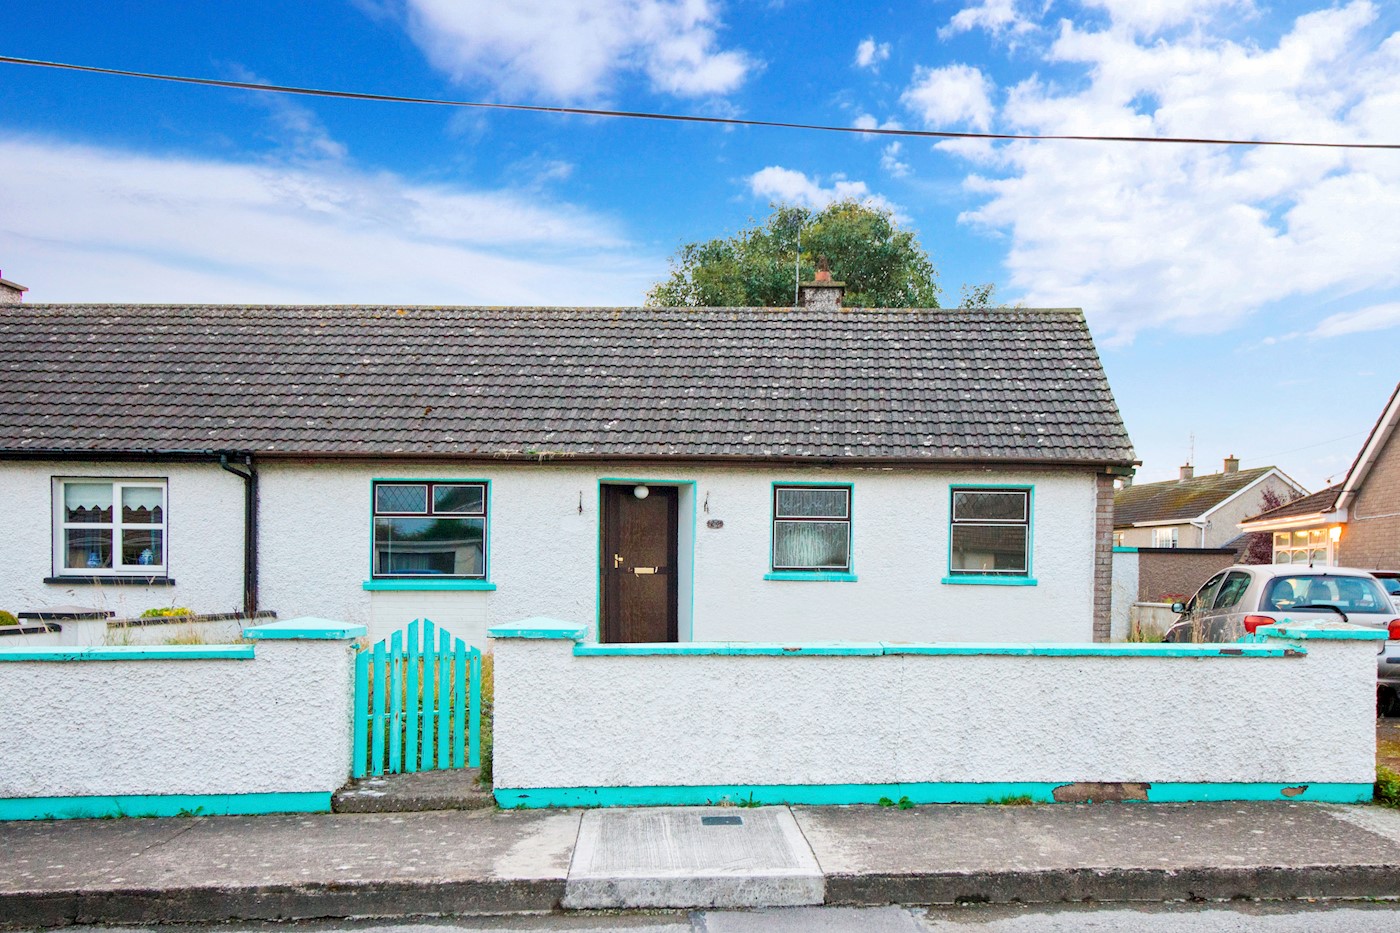 24 Father McCooey Terrace, Clogherhead, Co. Louth, A92 T181 1/9